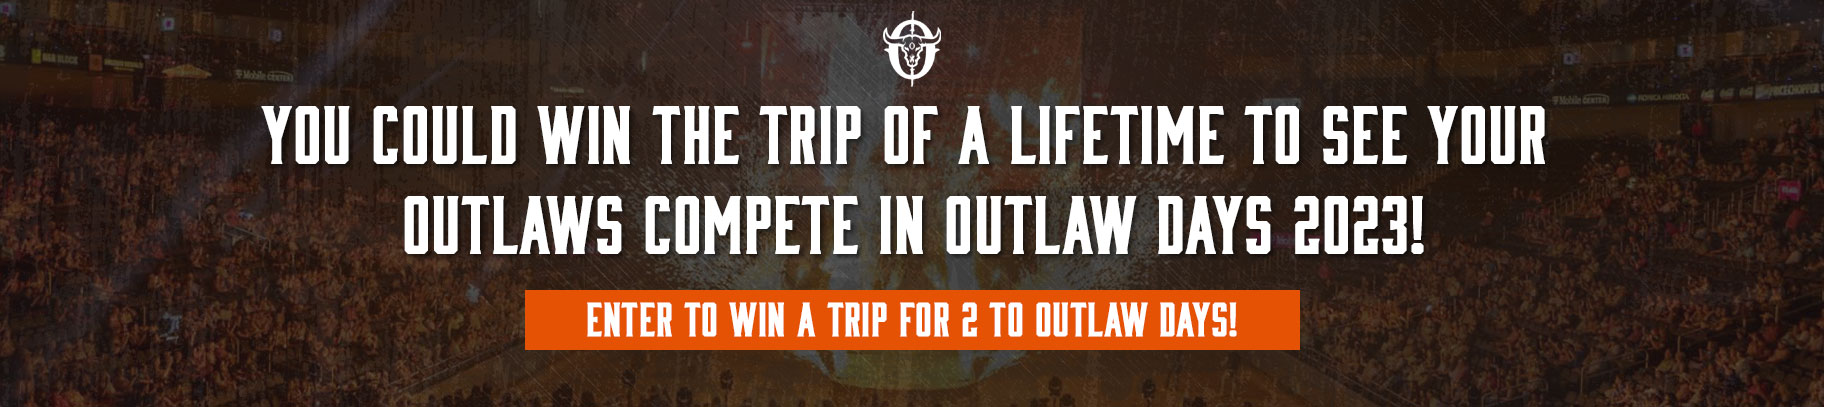 Win a Trip to Outlaw Days 2023!